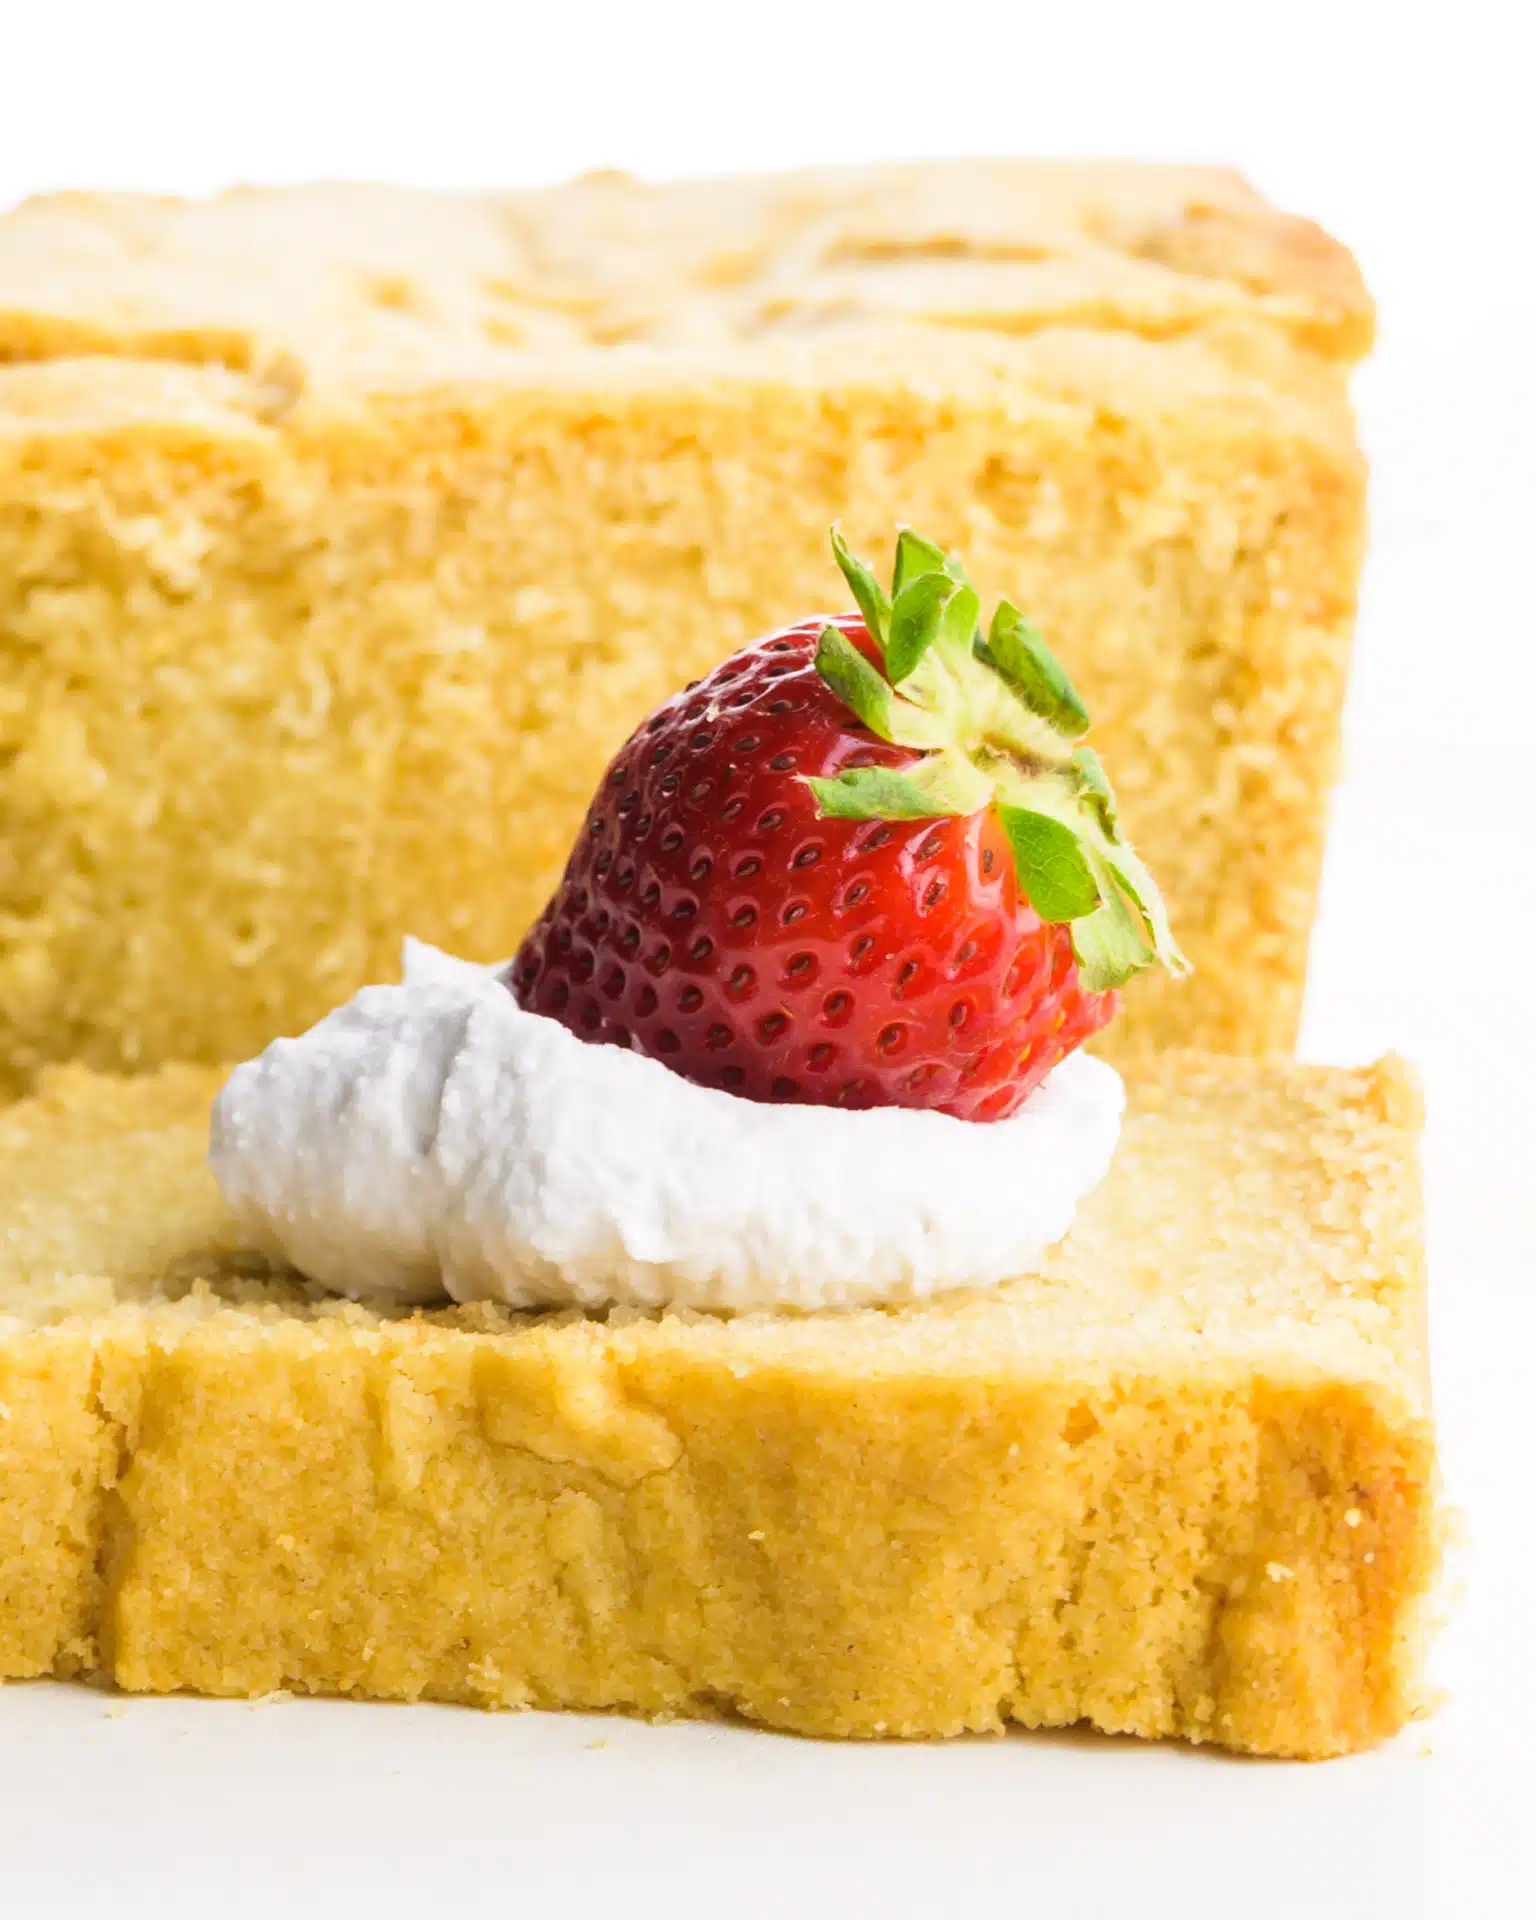 A slice of vegan pound cake has whipped cream and a strawberry on it. The rest of the pound cake is behind it.